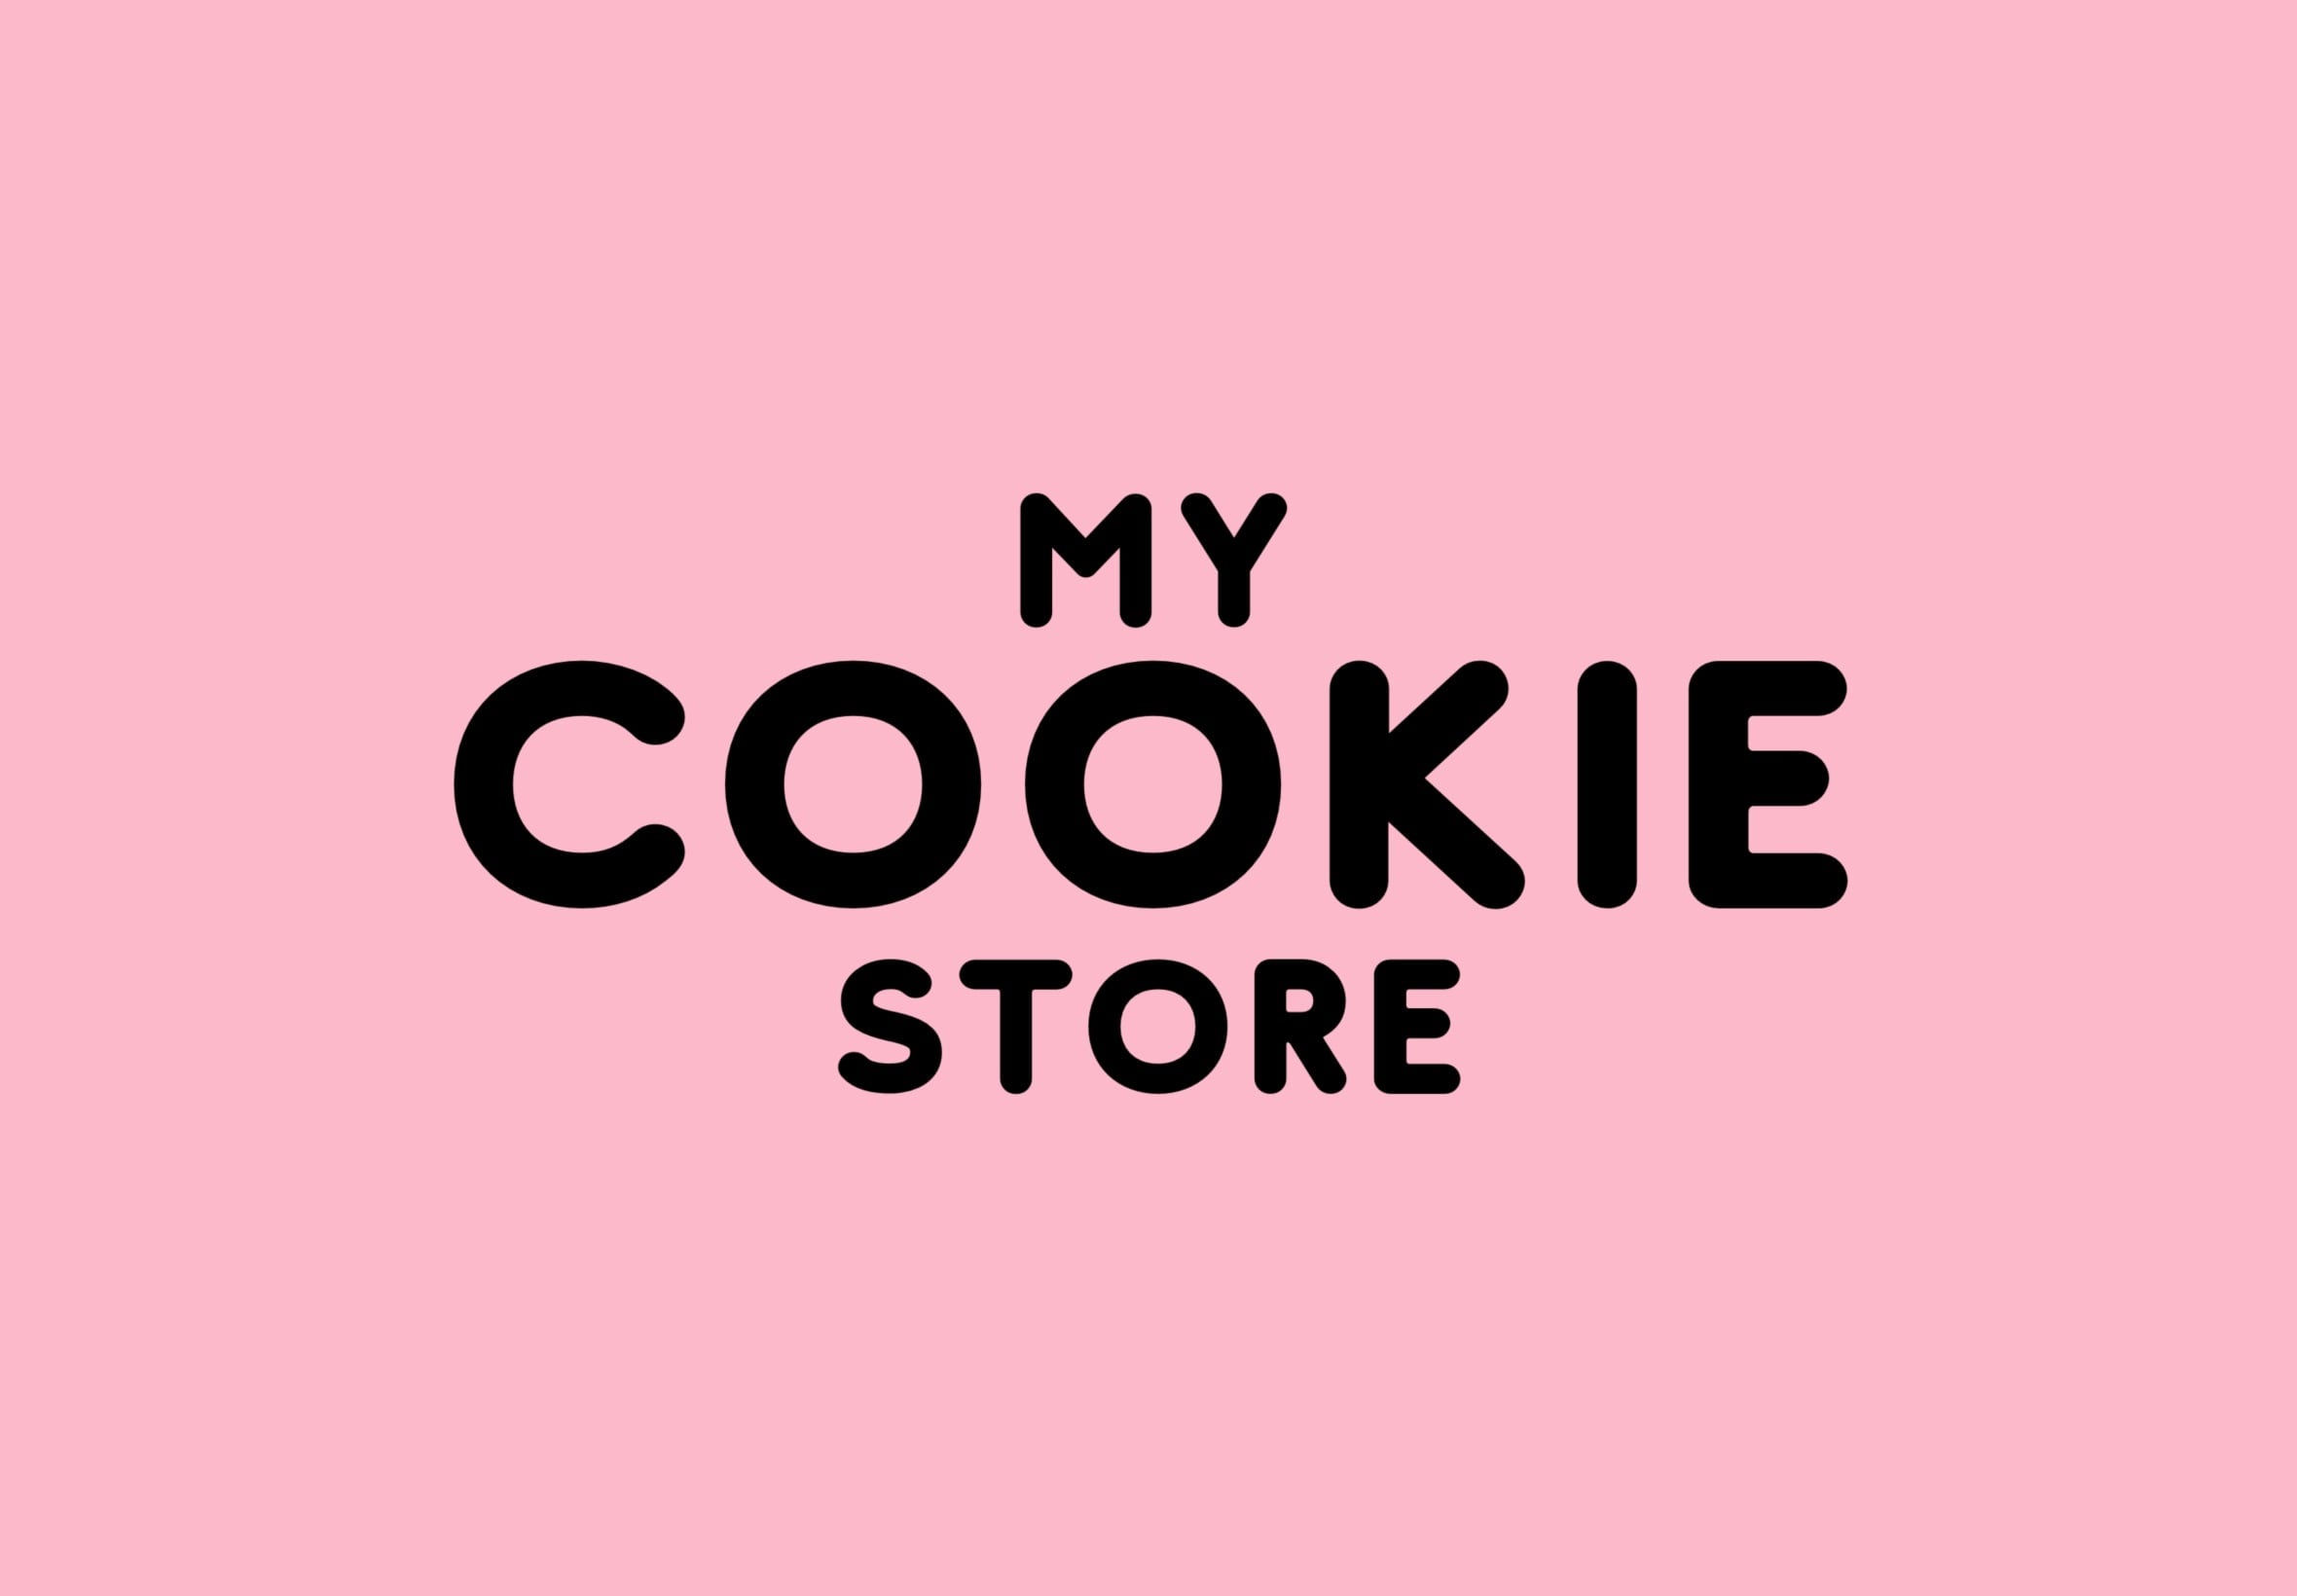 MY COOKIE STORE